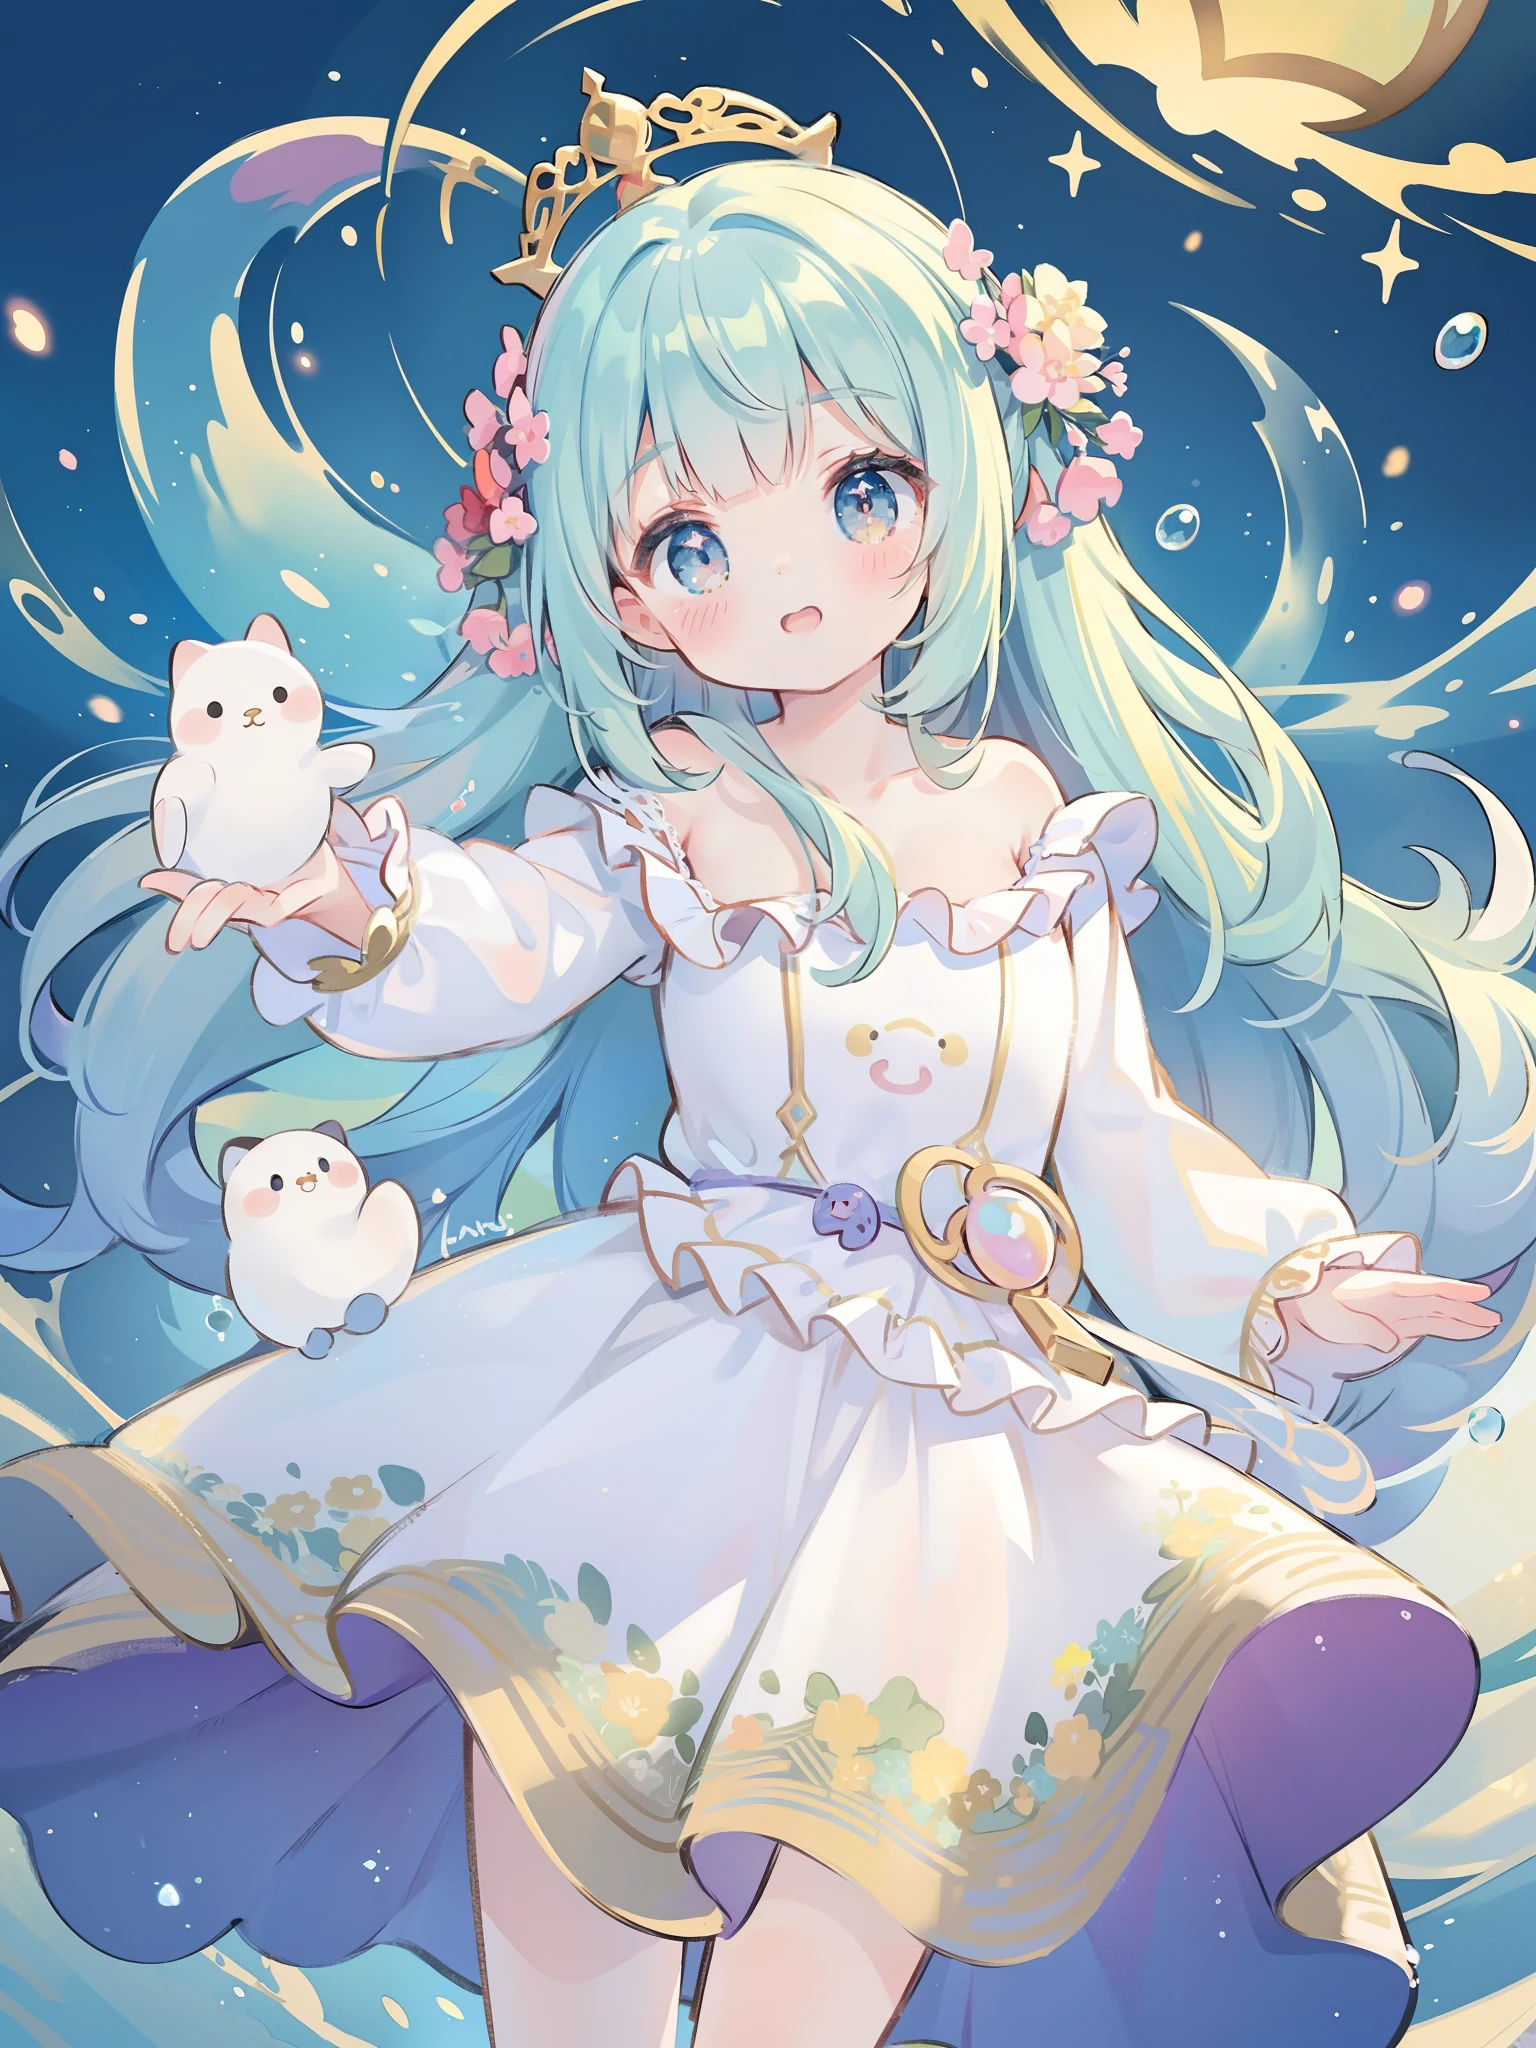 masterpiece, best quality, 8k resolution, sharp focus, intricate detail, beautiful girl, sparkling eyes, golden ratio face, otherworldly liquid, watercolor, pastel colors, bright colors, whimsical, colorful, sharp focus, high resolution, fine detail, ((layered tiered puffy long sleeves ballgown)), ((round eyes)), iridescent bubbles, fantasia background